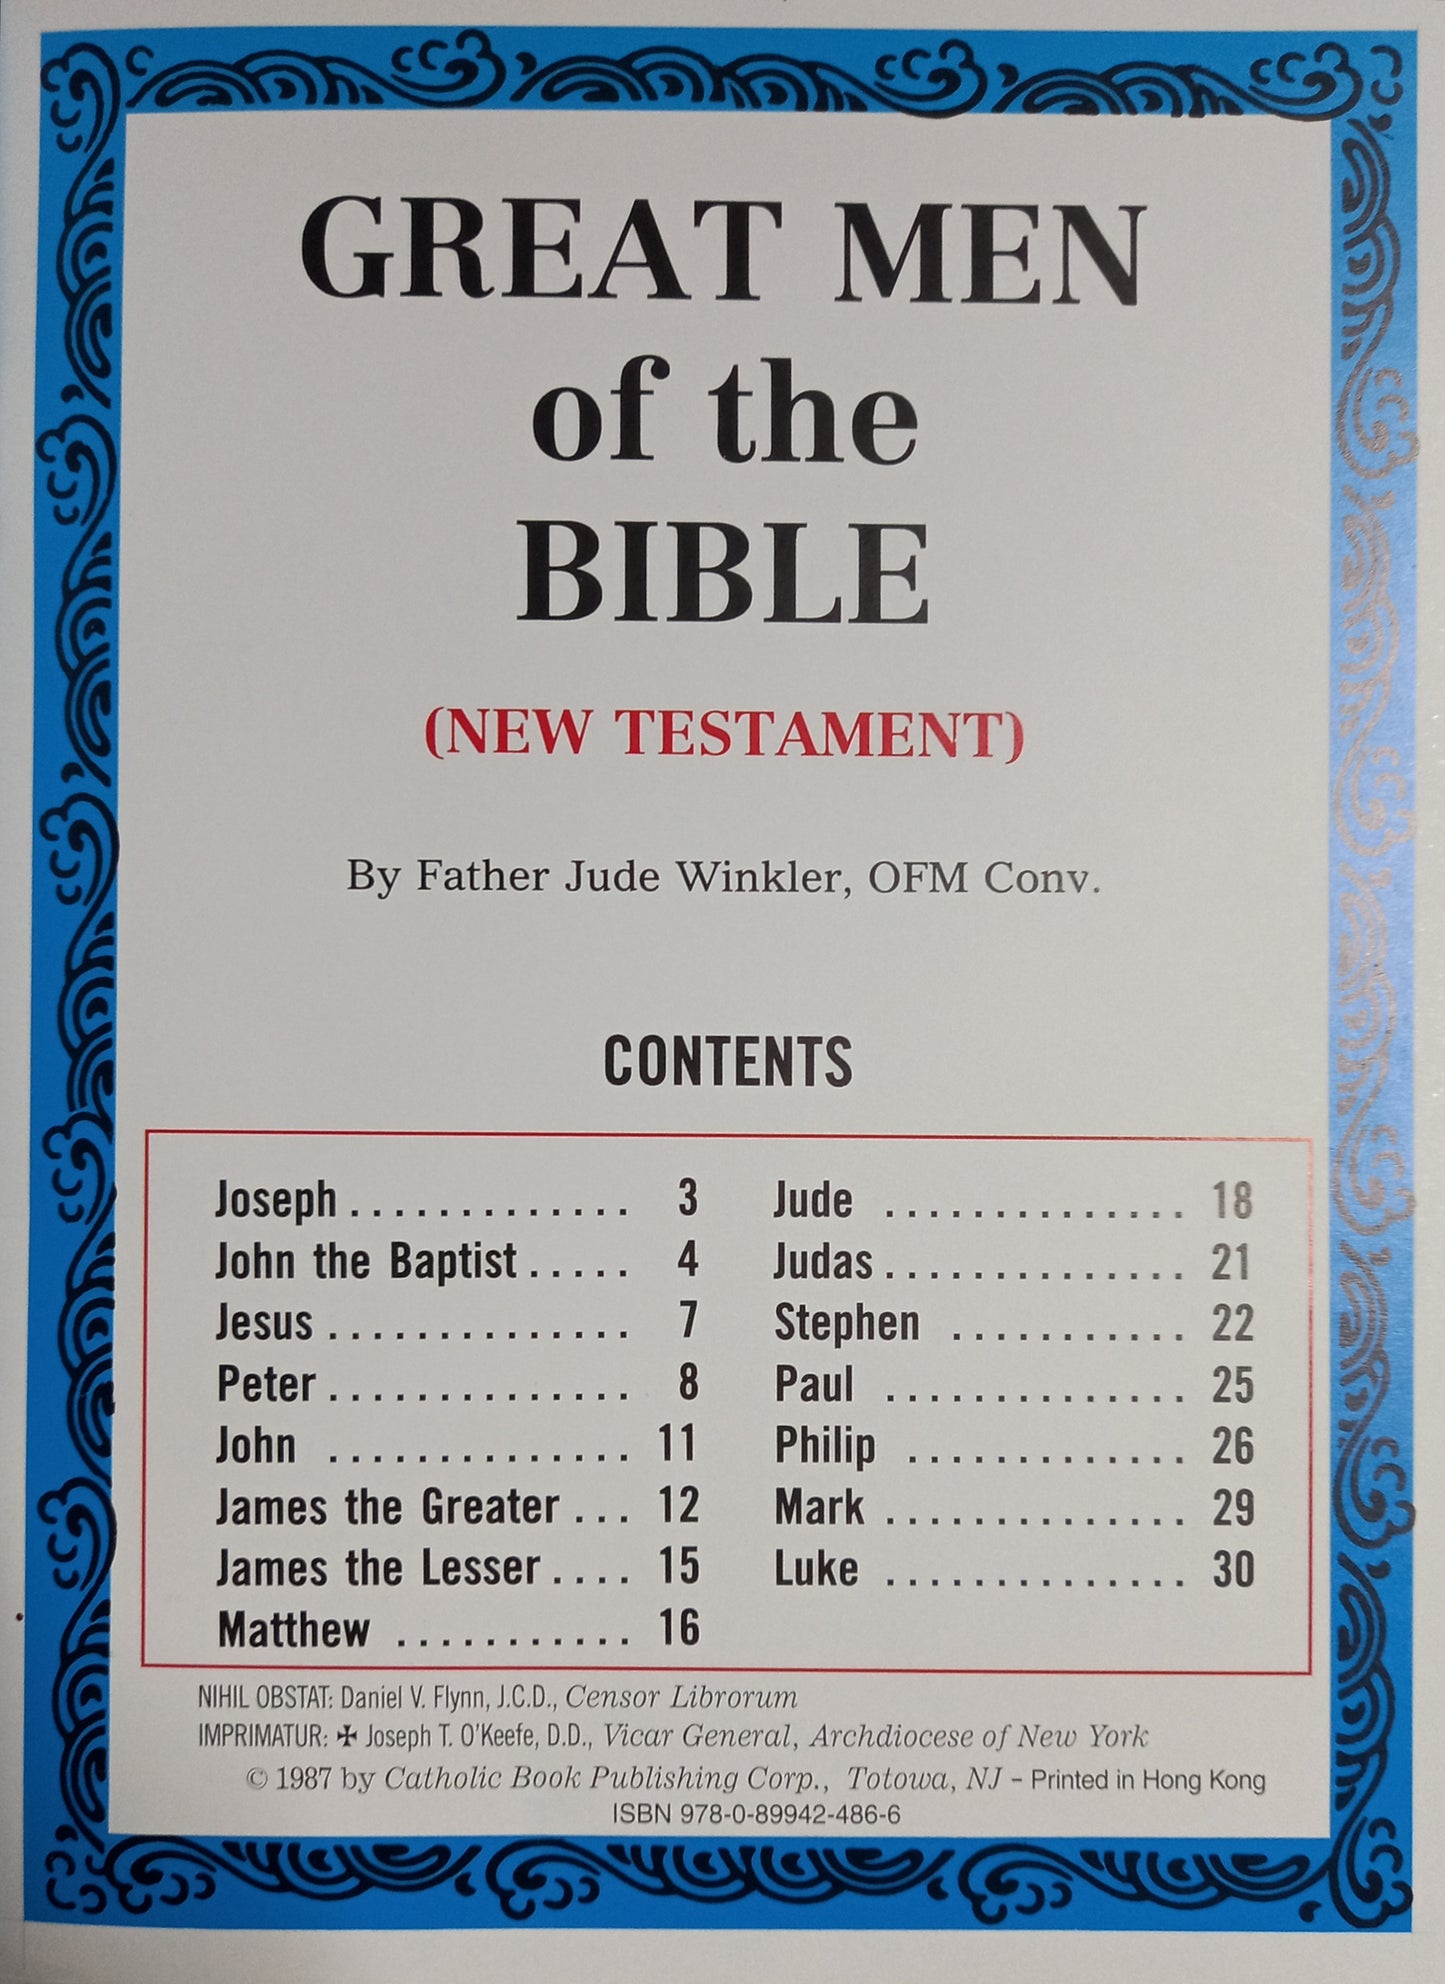 Great Men of the New Testament